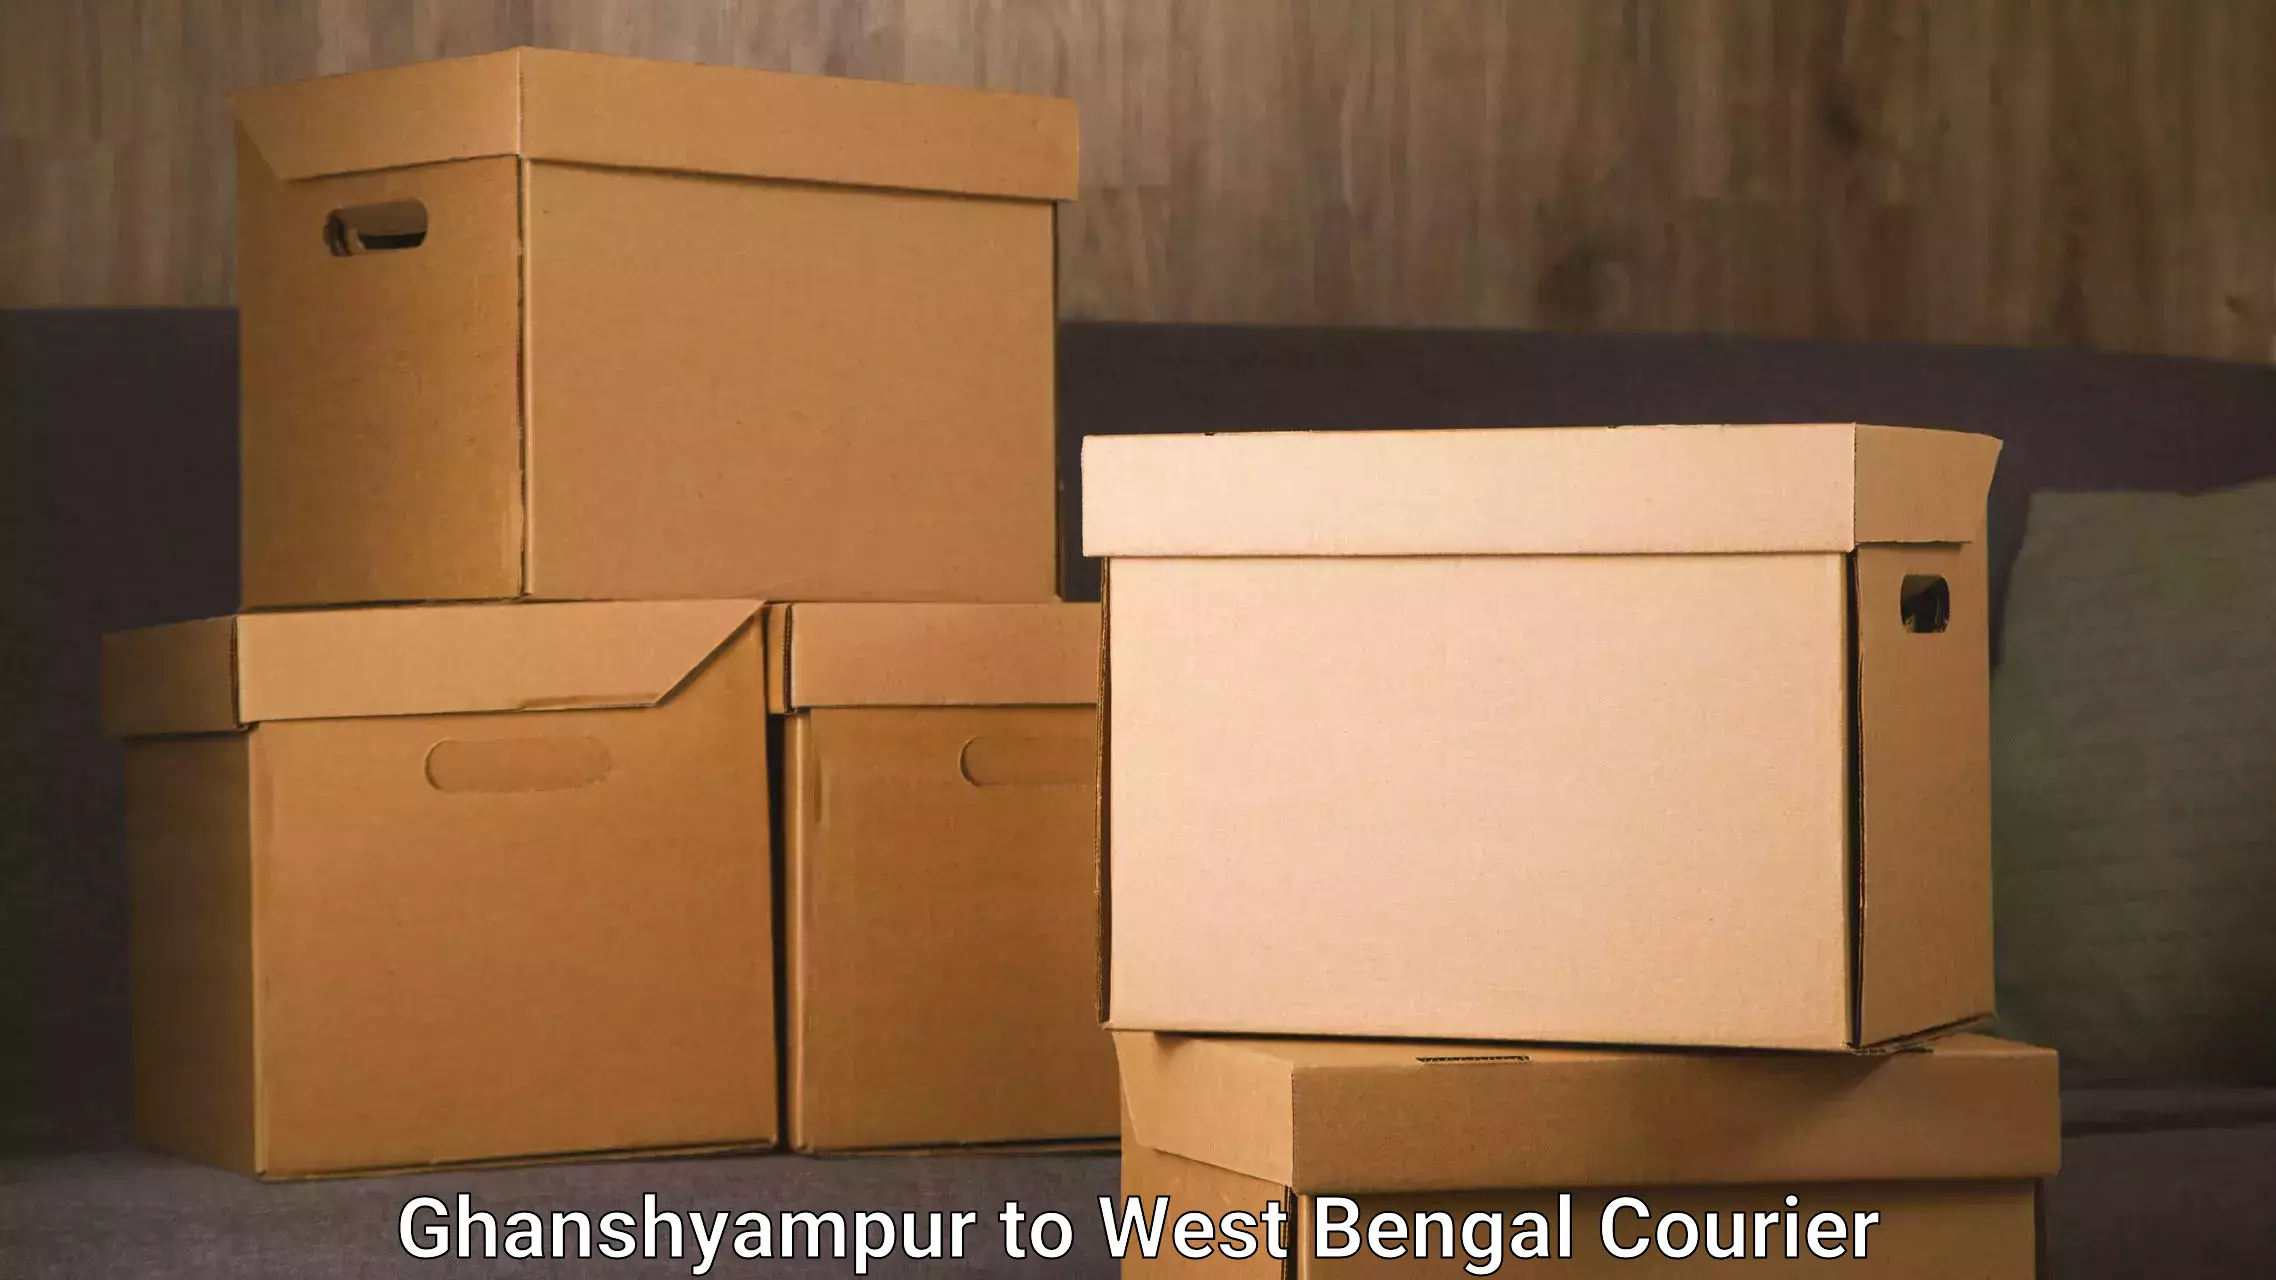 Furniture transport professionals Ghanshyampur to West Bengal